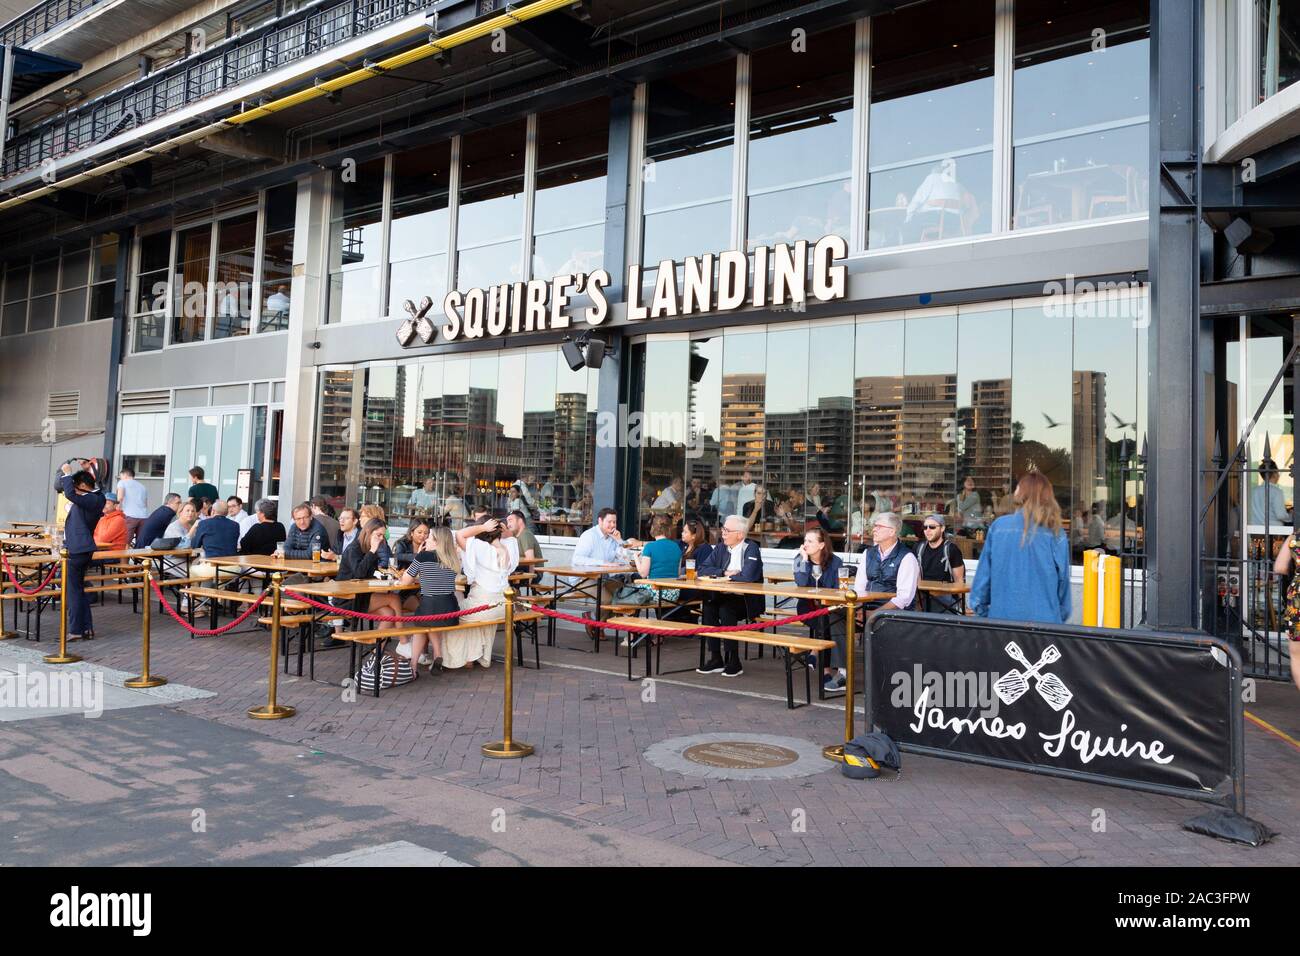 Sydney restaurant - People eating a meal outside Squires Landing - a restaurant in Circular Quay, Sydney Harbour, Sydney, Australia Stock Photo